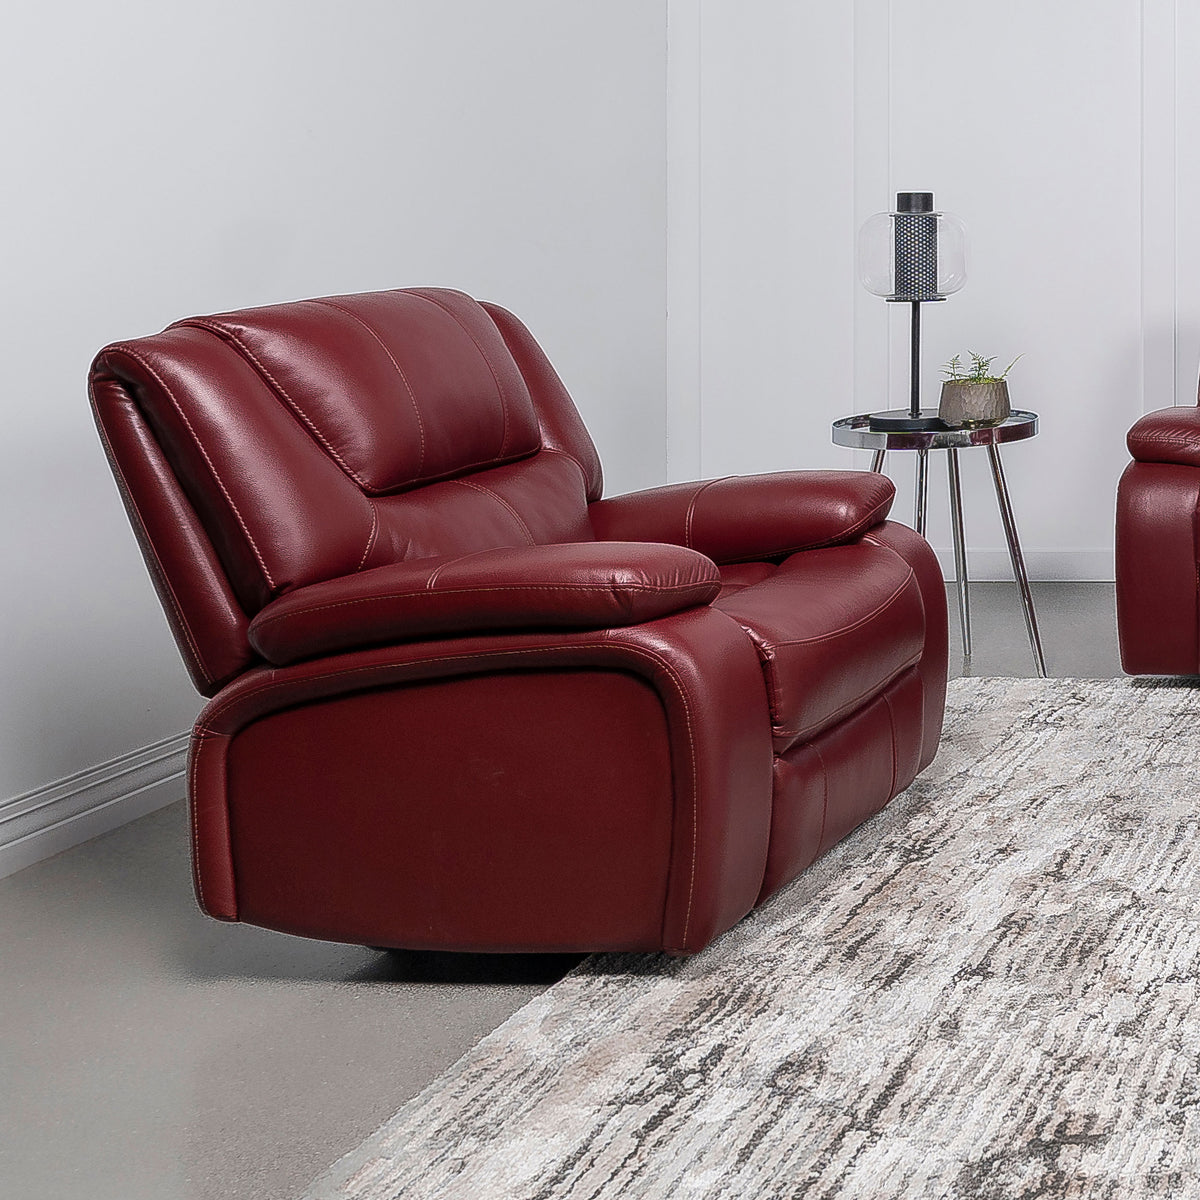 Camila Upholstered Glider Recliner Chair Red Faux Leather  Las Vegas Furniture Stores